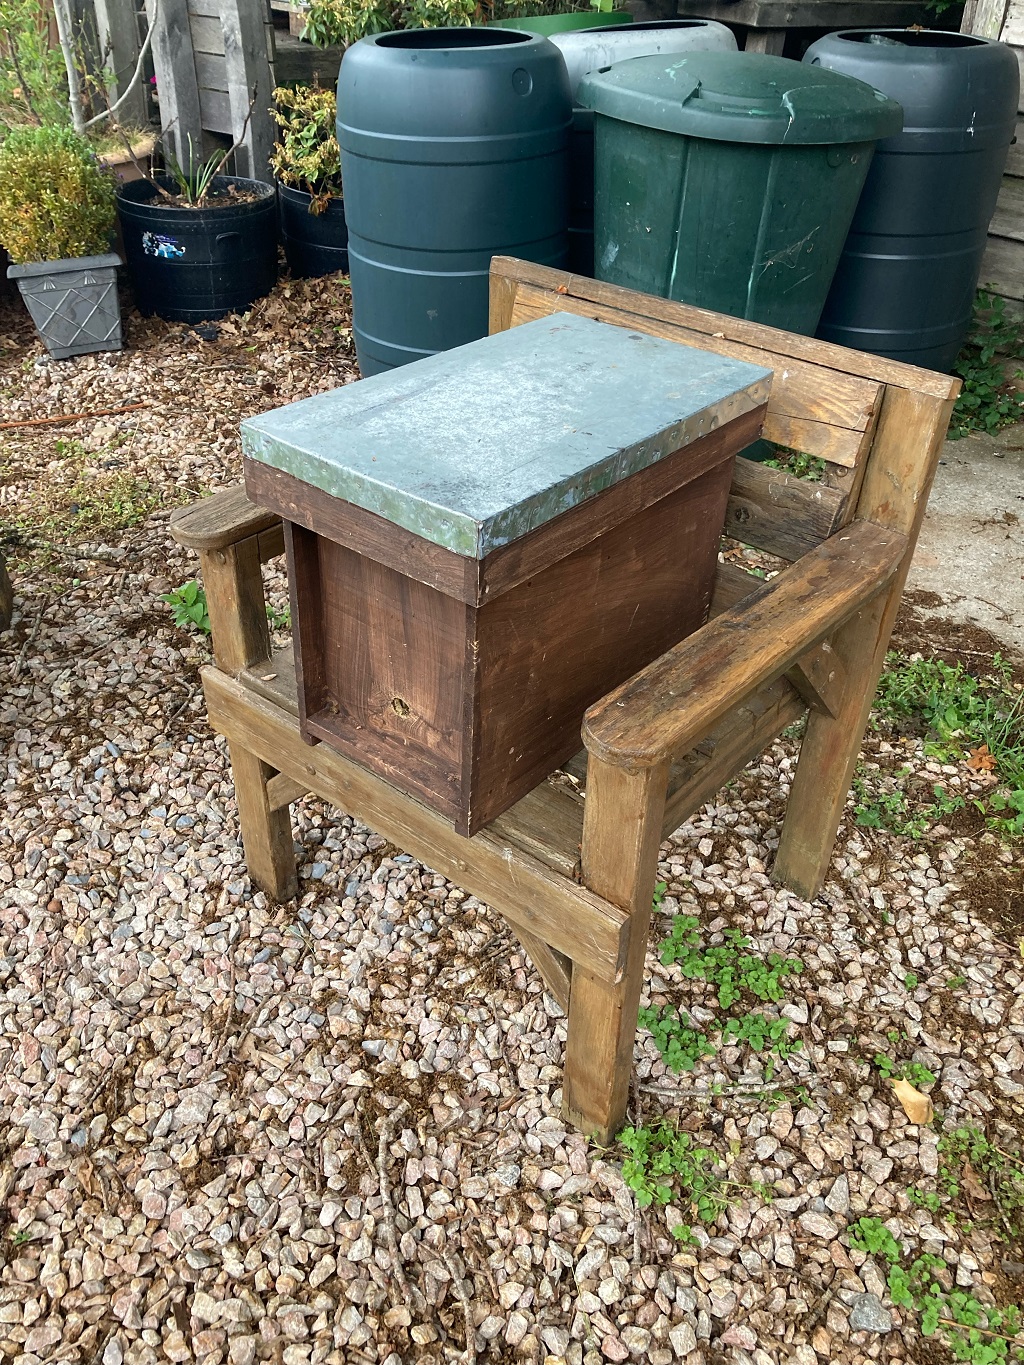 Bees new home